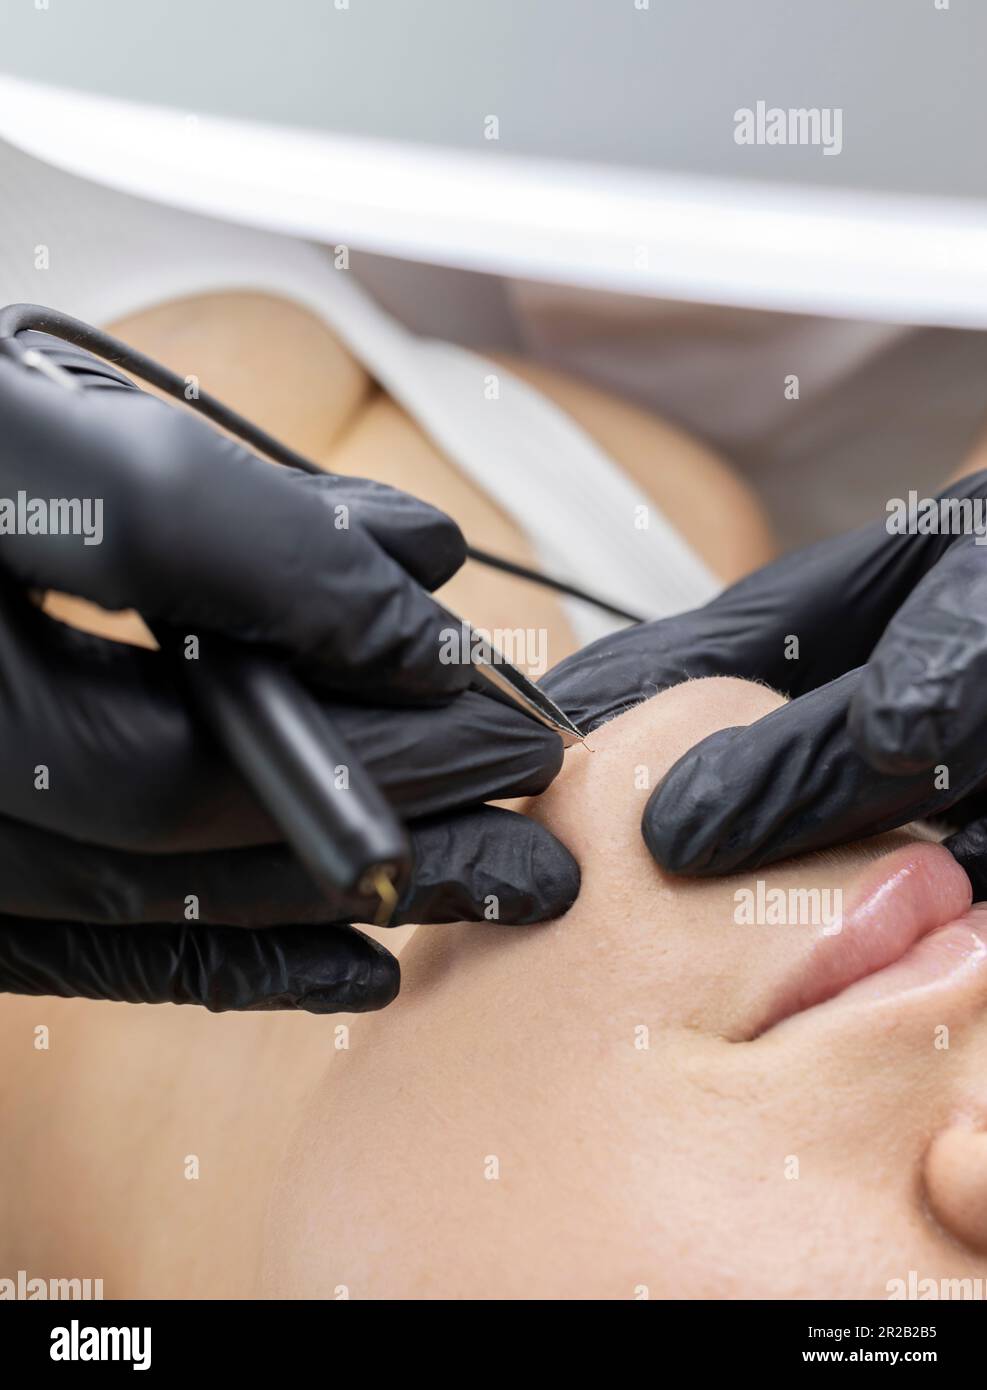 Hirsutism Closeup Dermatologist Removes Hair On Jawline, Chin Of Female Client's Face With Electrolysis Procedure, Electric Epilation In Beauty Salon Stock Photo